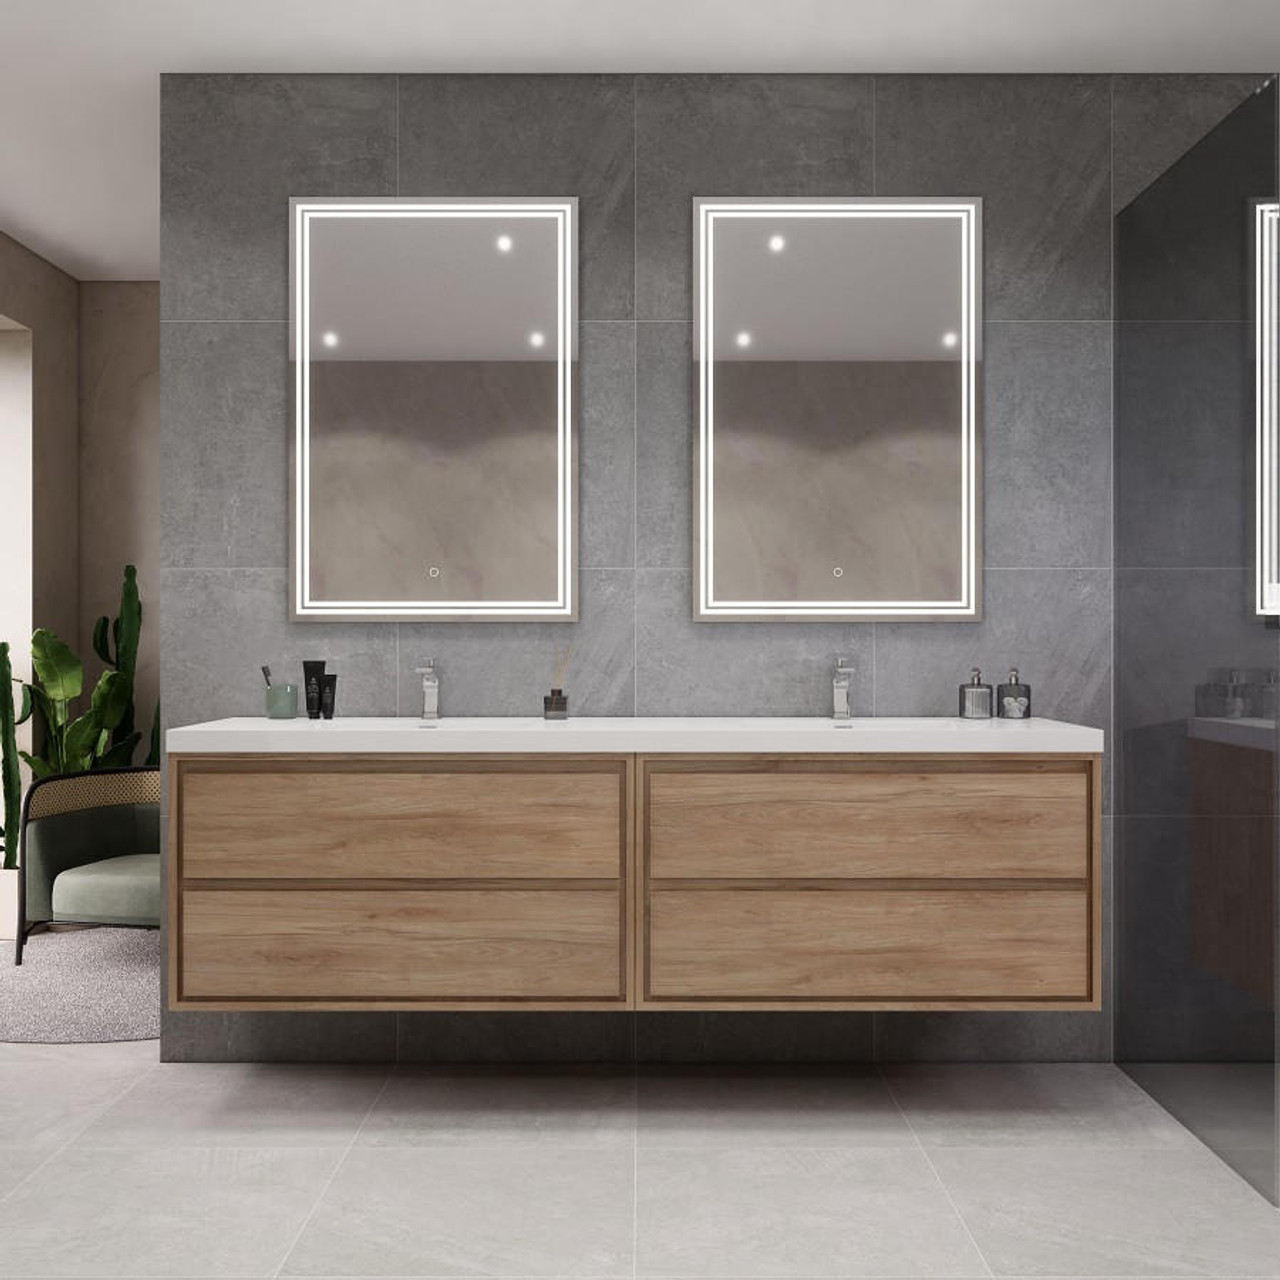 https://cdn11.bigcommerce.com/s-qgdlnuy6t7/images/stencil/1280x1280/products/1319/15071/sage-sage-84-double-sink-wall-mounted-modern-vanity-84dd__79225.1689274656.jpg?c=2